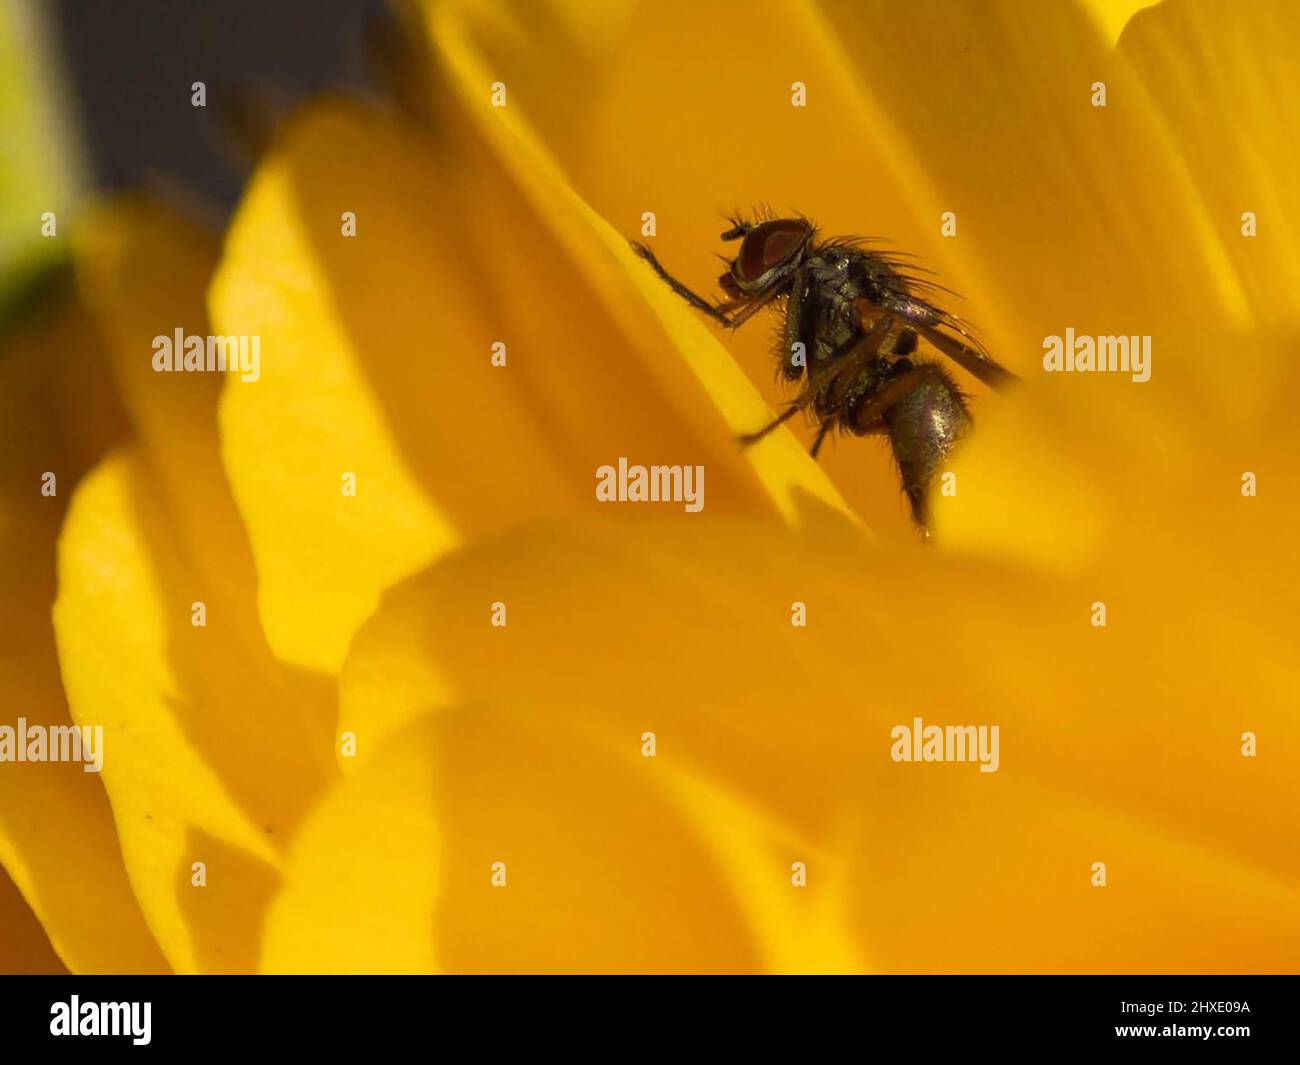 Wasp on a yellow flower Stock Photo